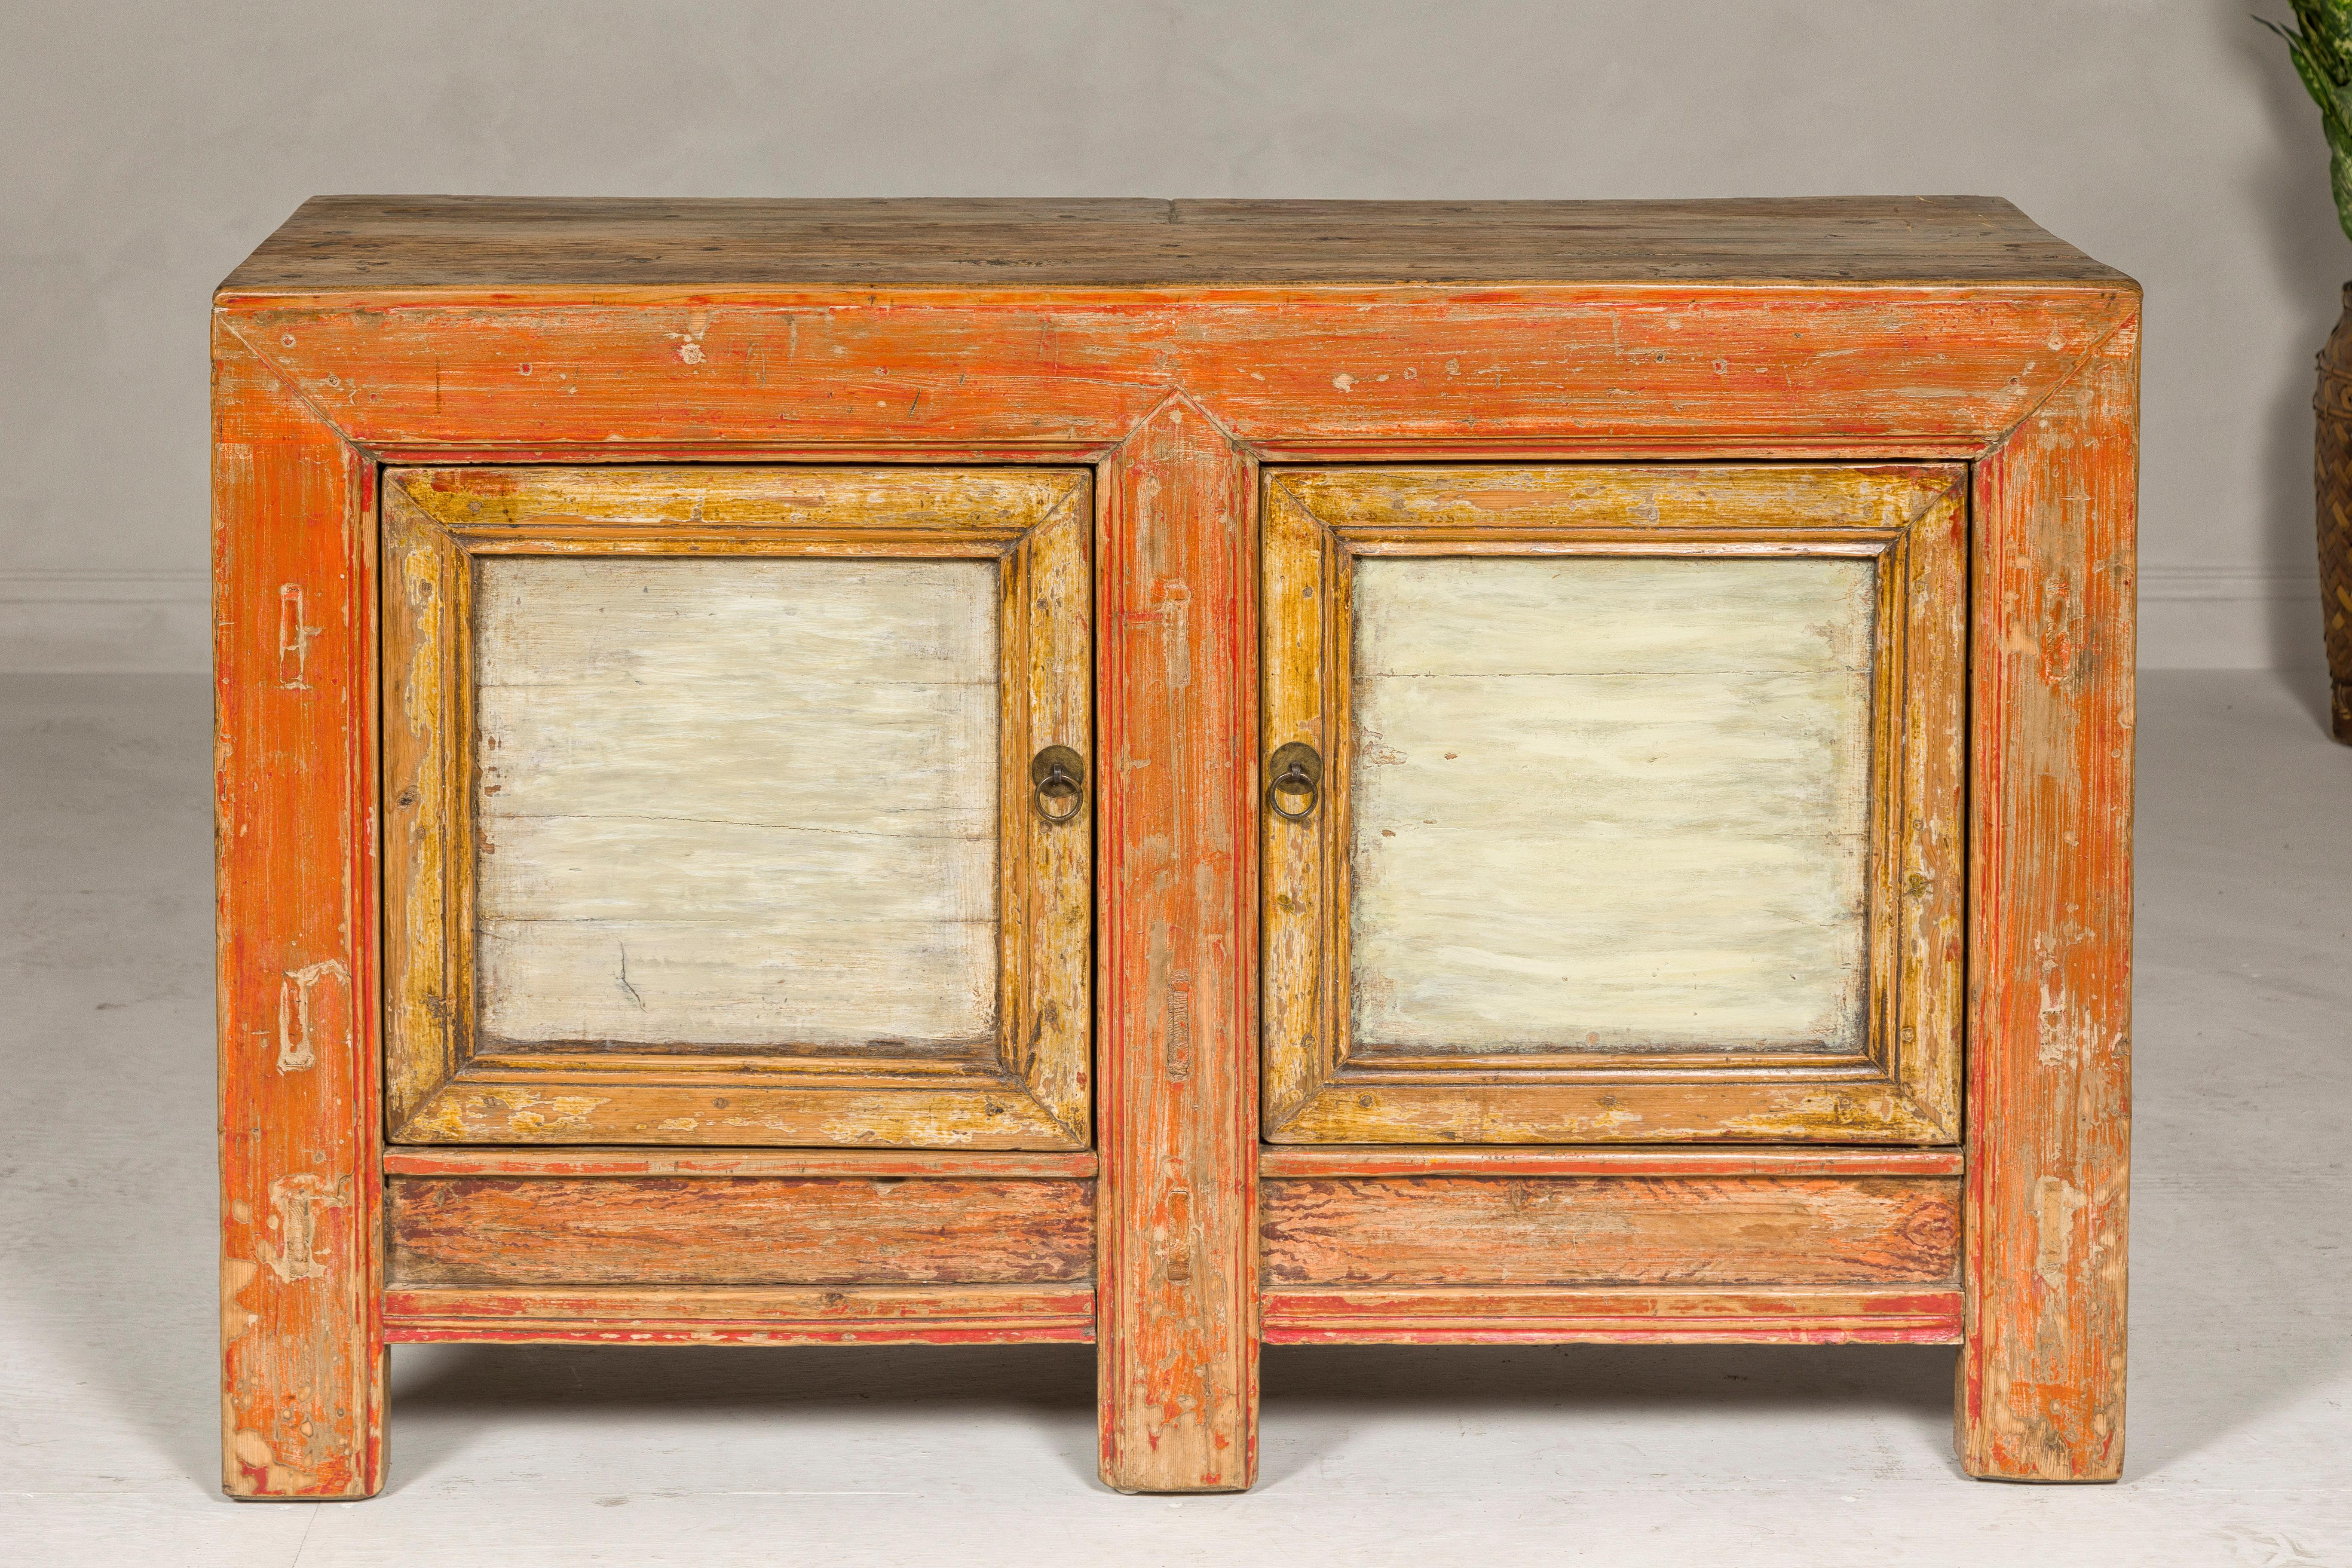 20th Century Country Style Painted Two-Door Buffet with Distressed Orange and Off-White Color For Sale